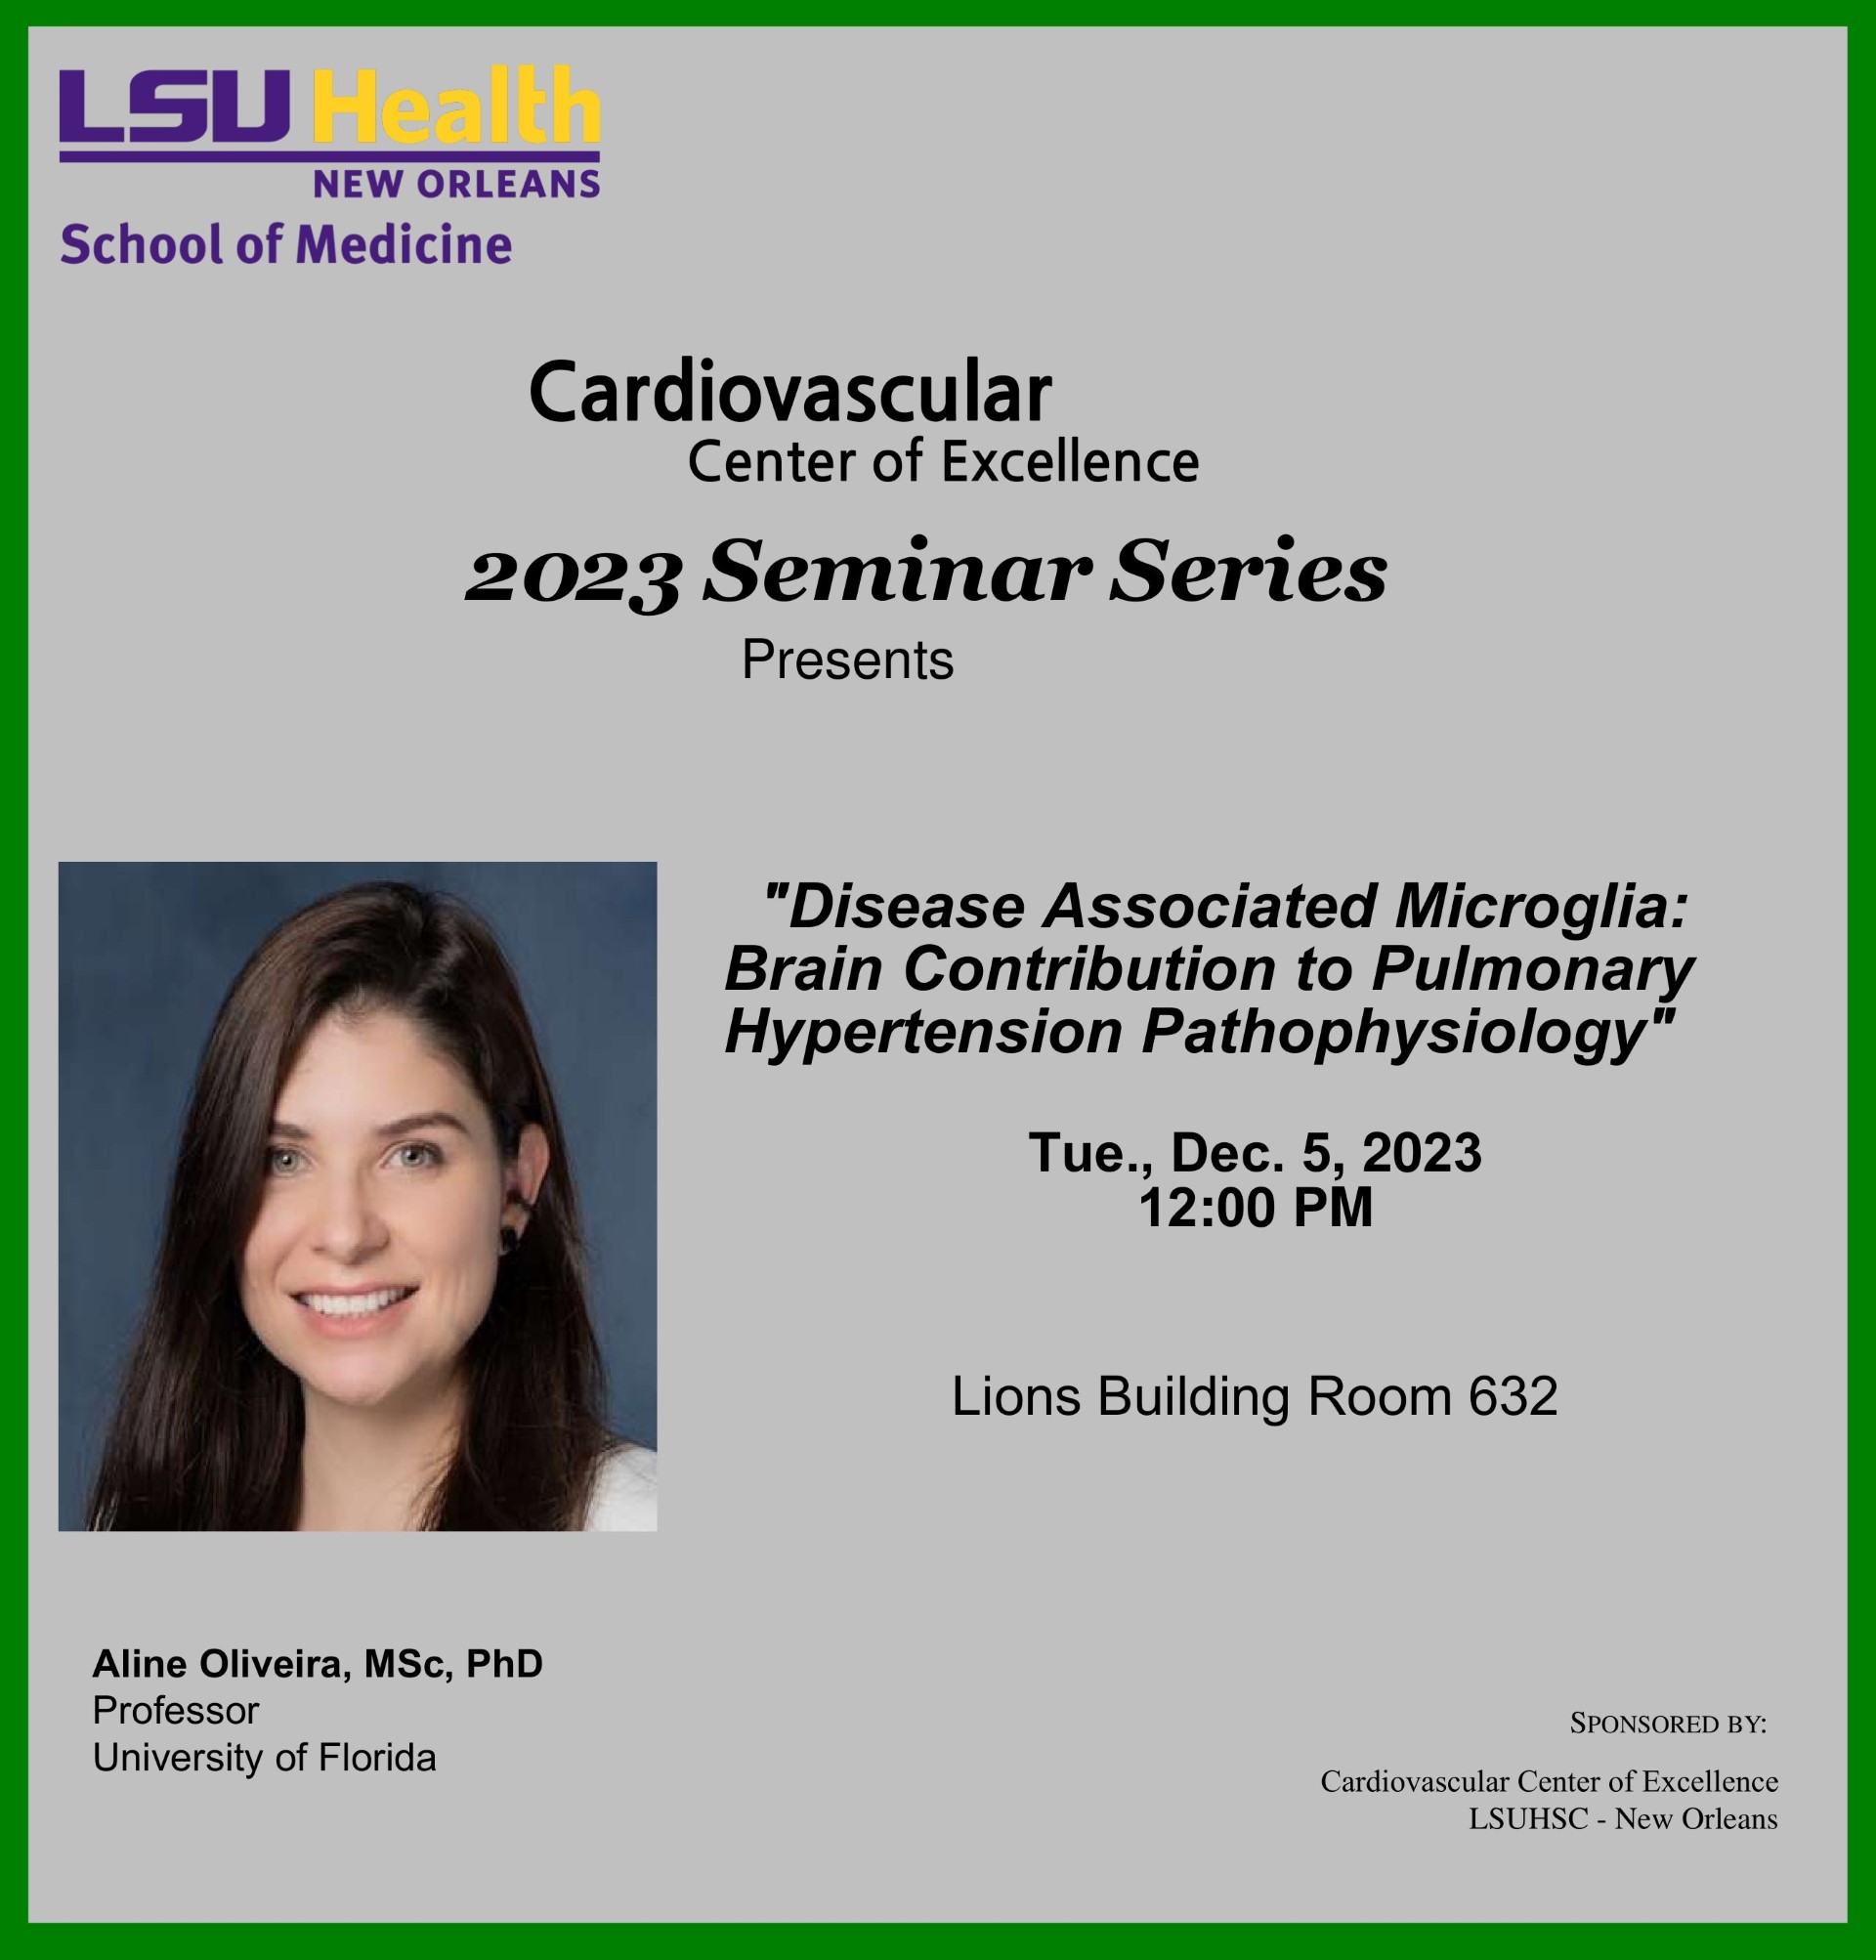 Event Title: Cardiovascular Center of Excellence Seminar Series Dr. Aline Oliveira, Event Date: December 05, Starting at 12:00 PM and ending at 01:00 PM in Building: Lions/LSU Clinics Building Room: 632